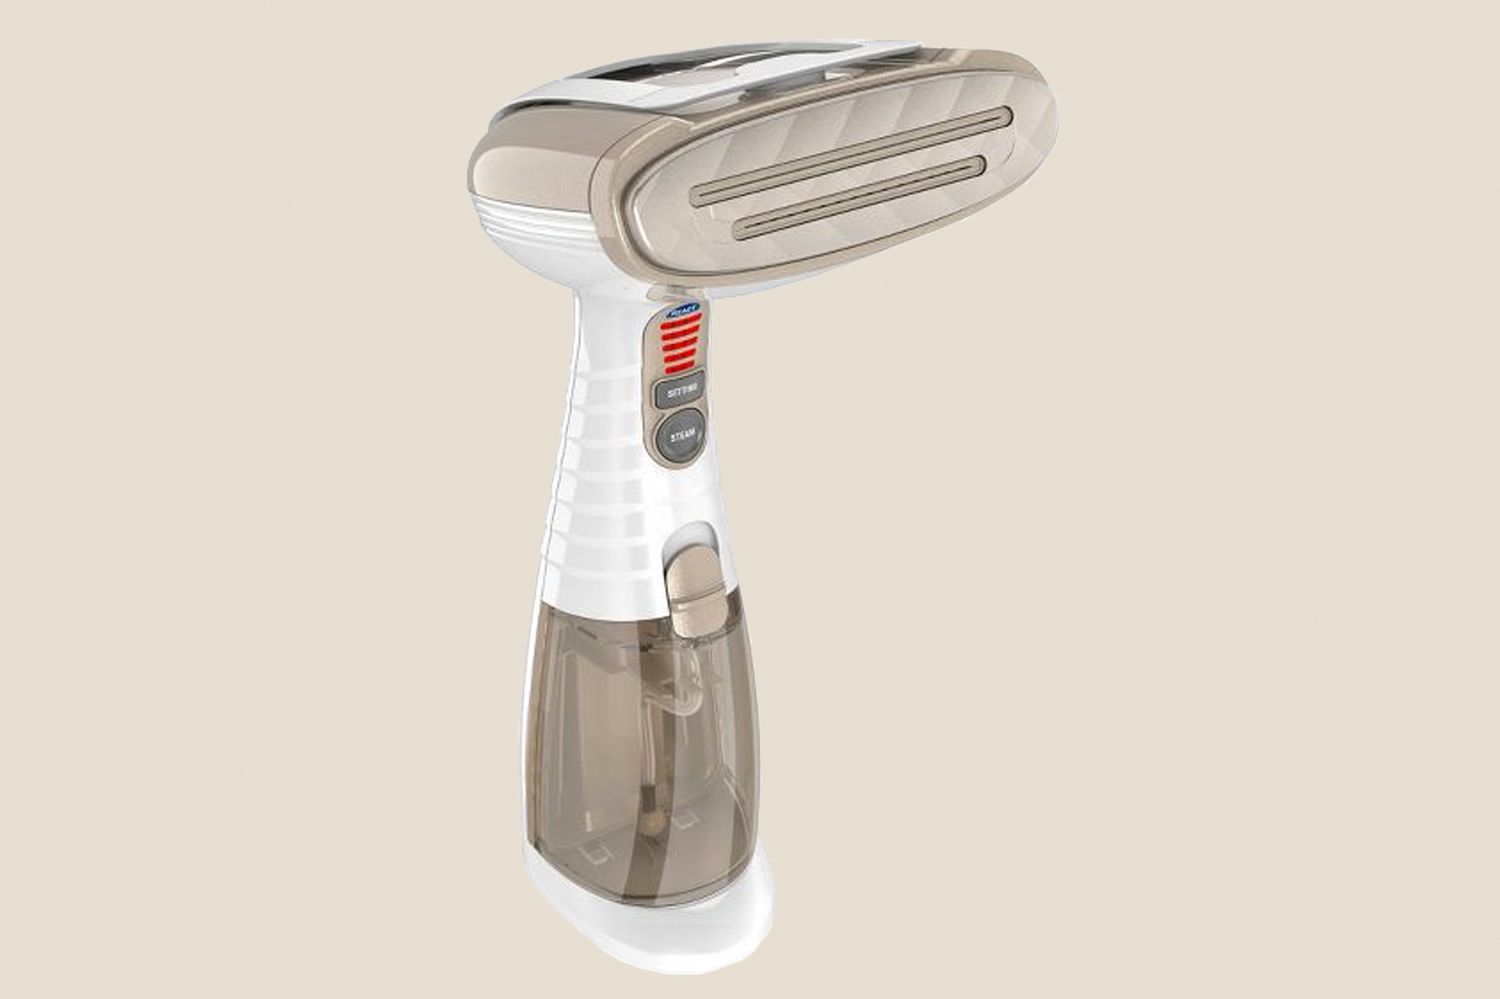 clothing fabric steamer